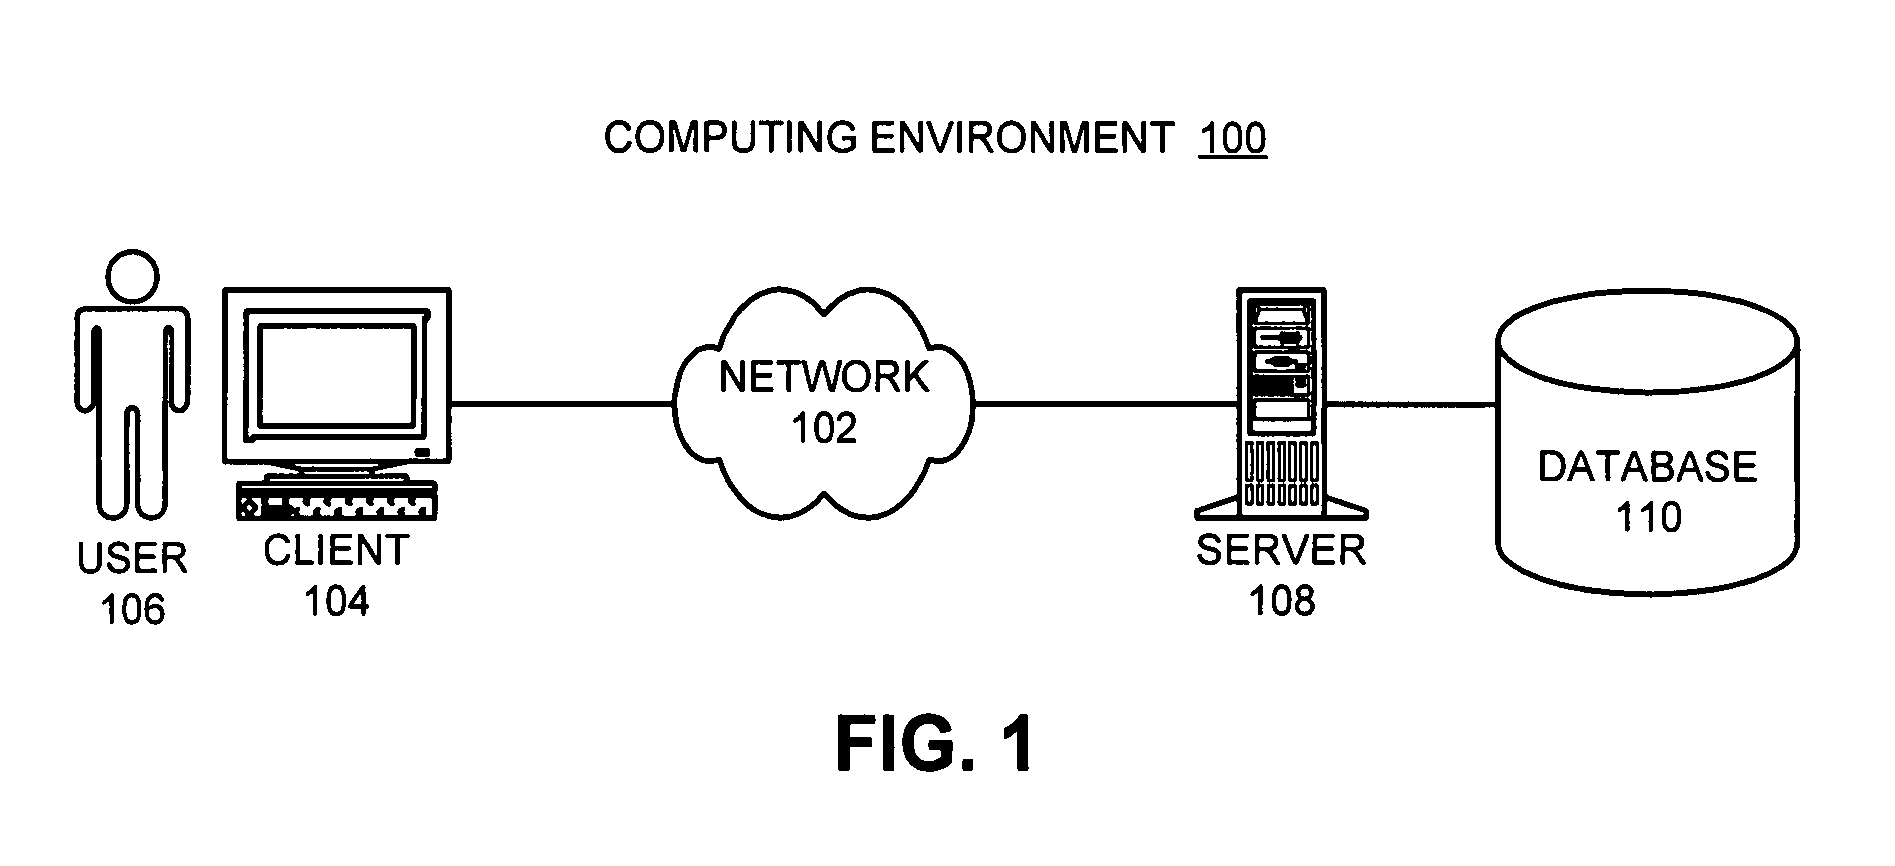 Method and apparatus for encrypting data to facilitate resource savings and tamper detection